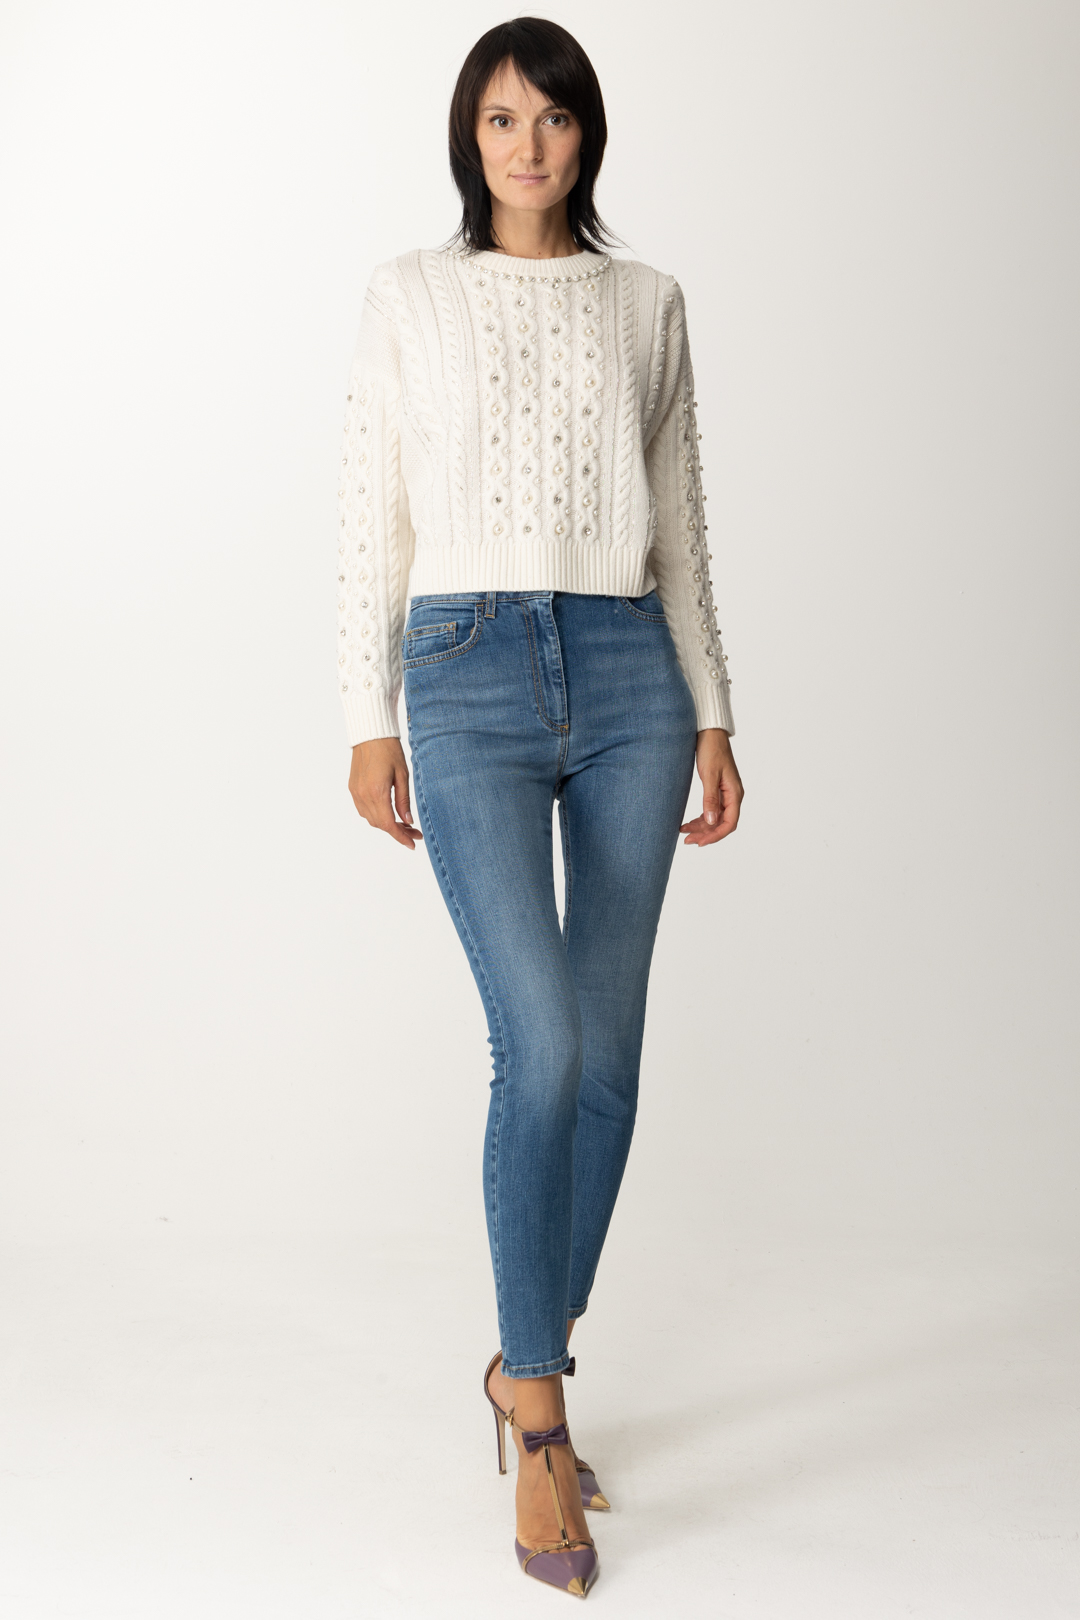 Preview: Elisabetta Franchi Wool sweater with pearls embroidery Burro